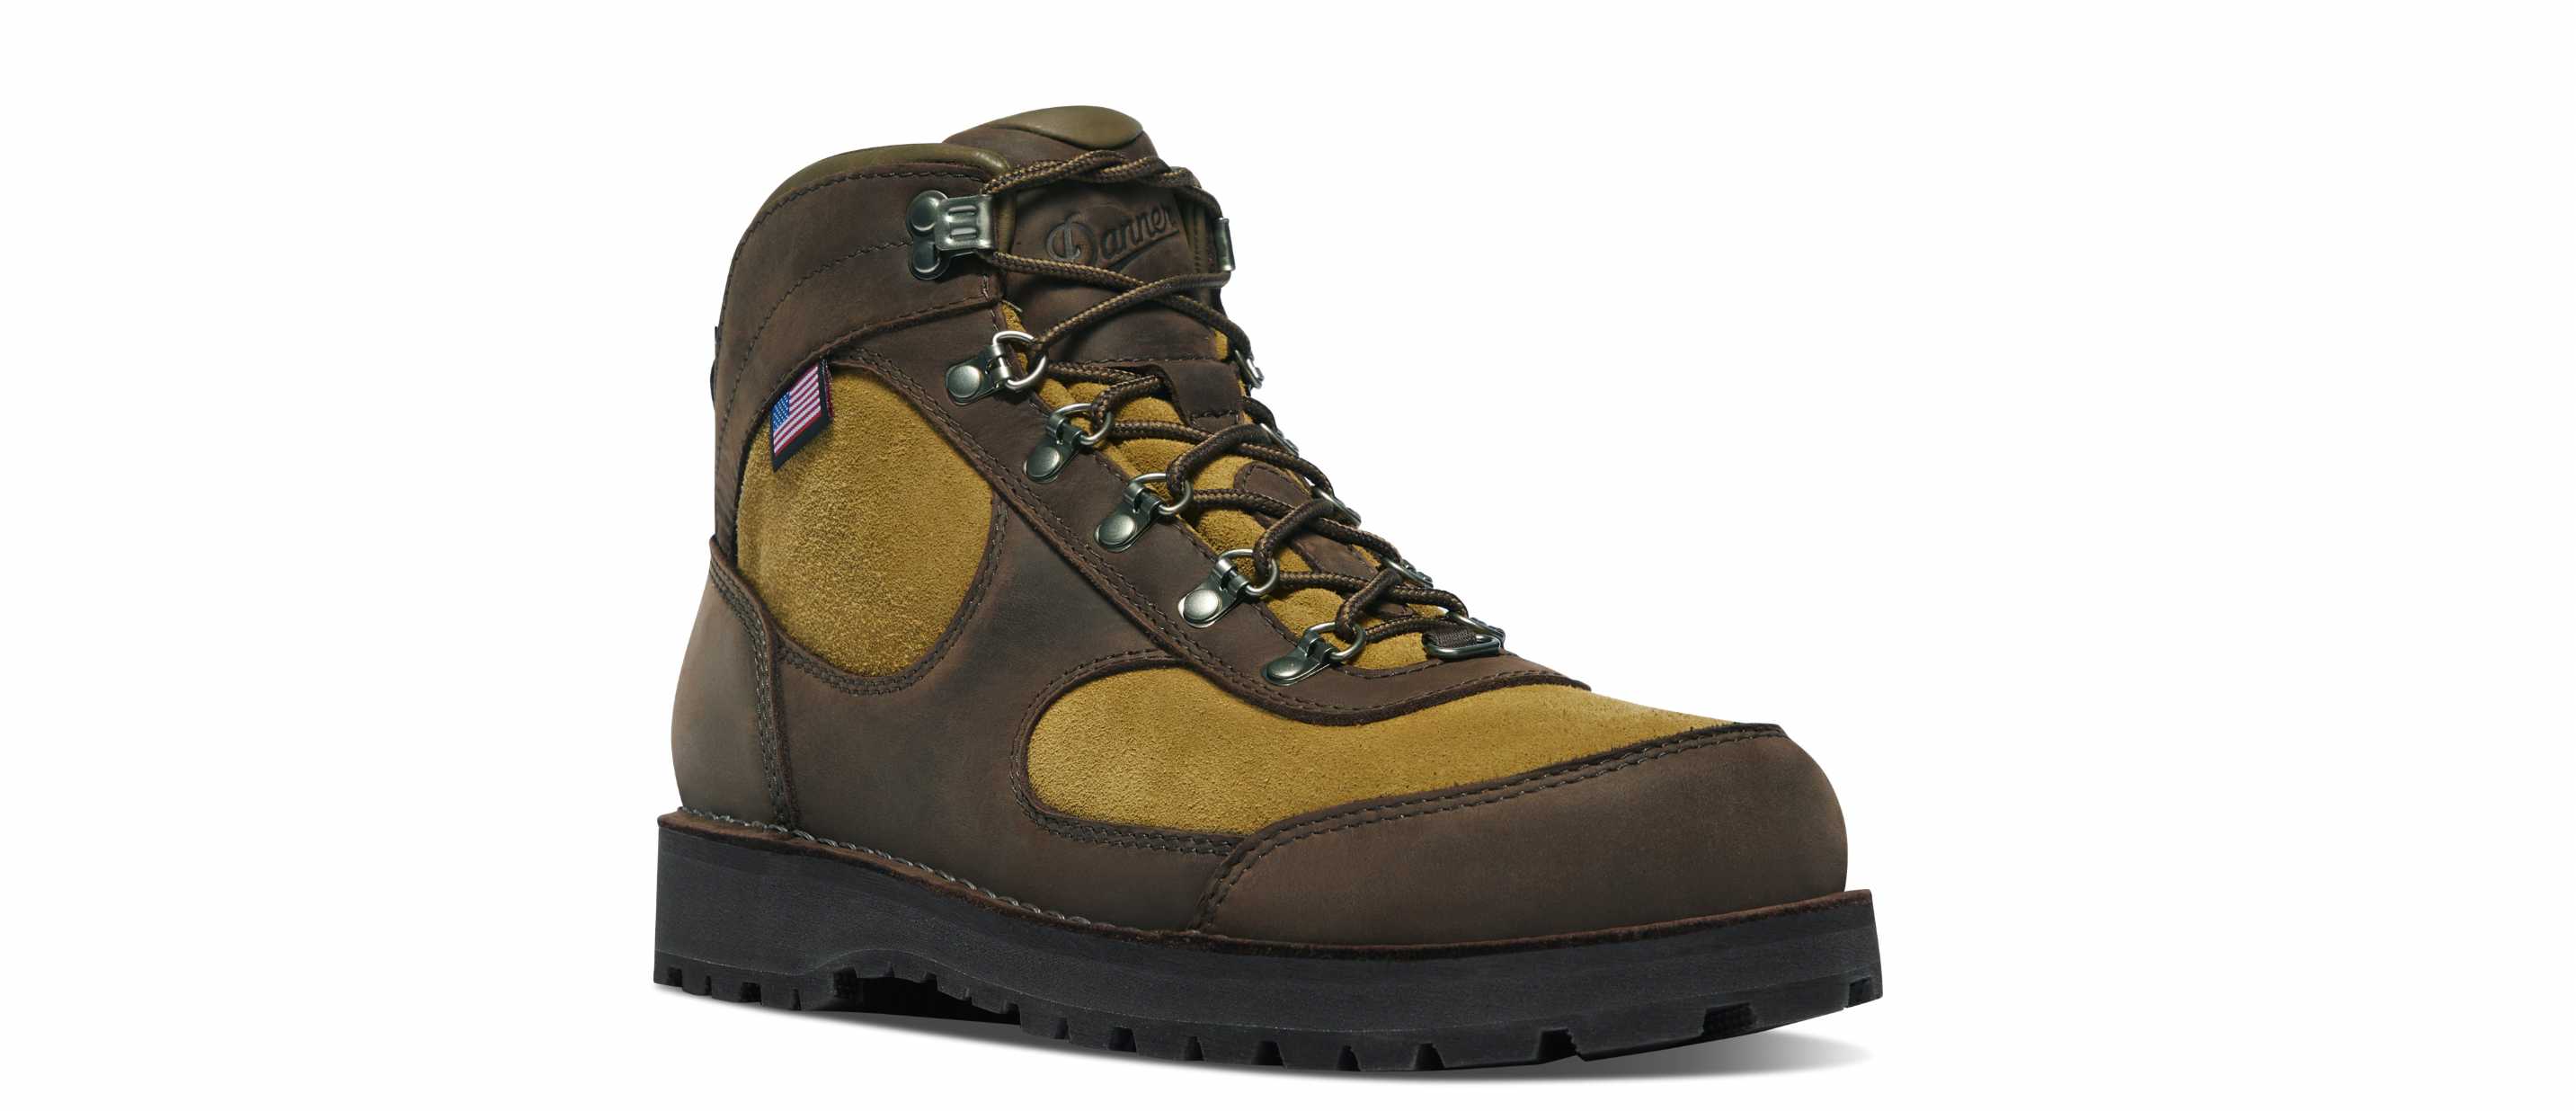 Cascade Crest Line of Boots Newly Recrafted from Danner Boot Company